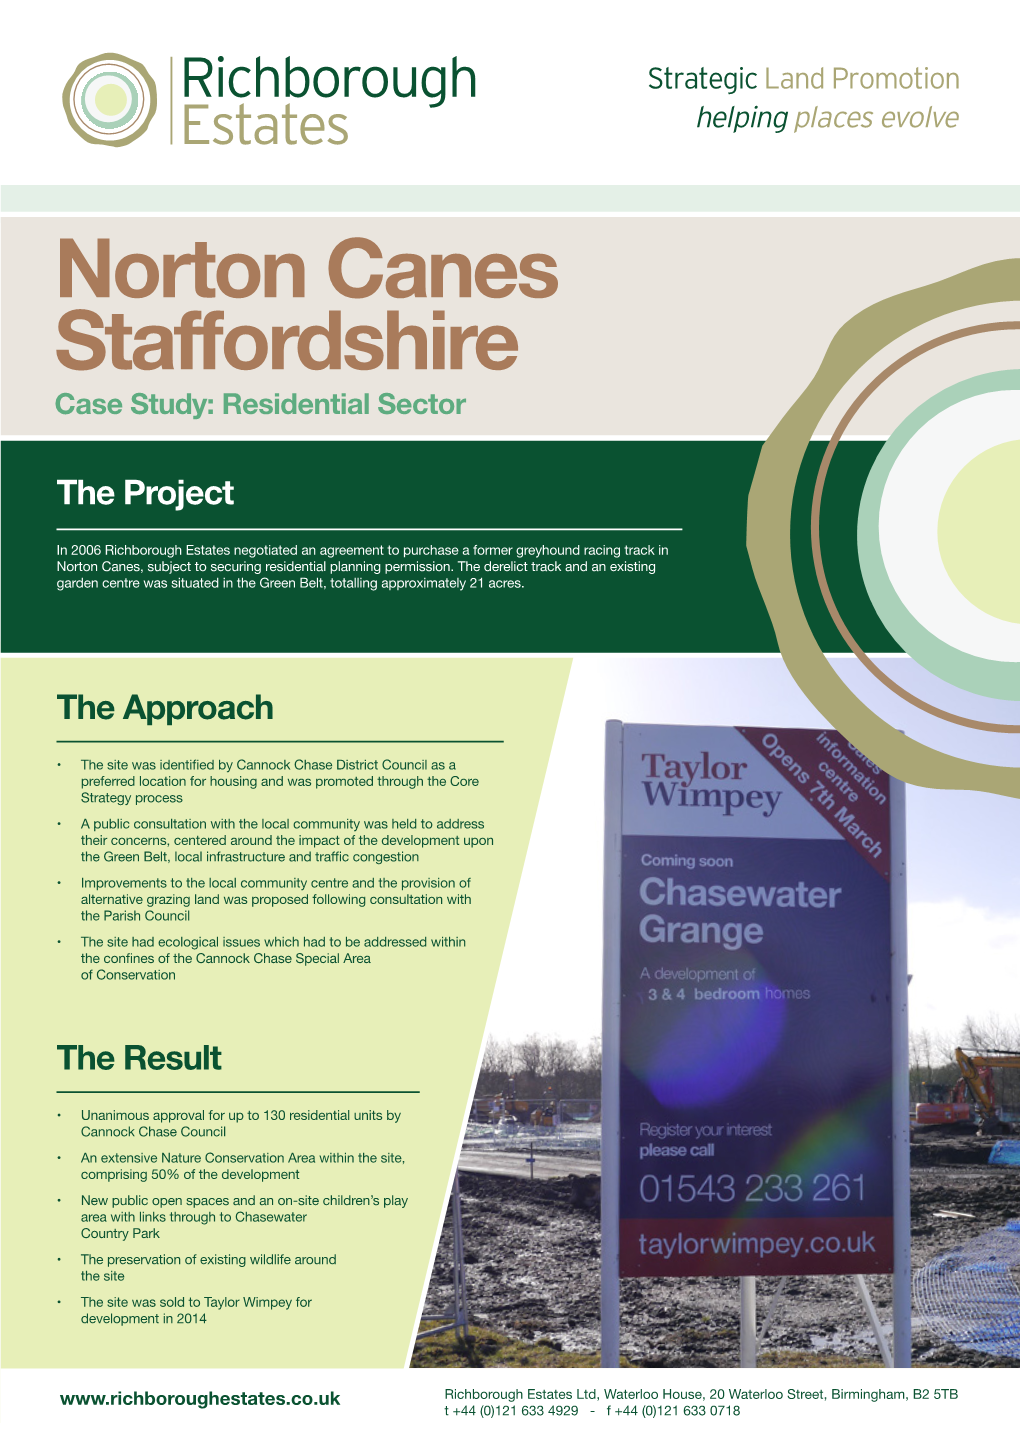 Norton Canes Staffordshire Case Study: Residential Sector